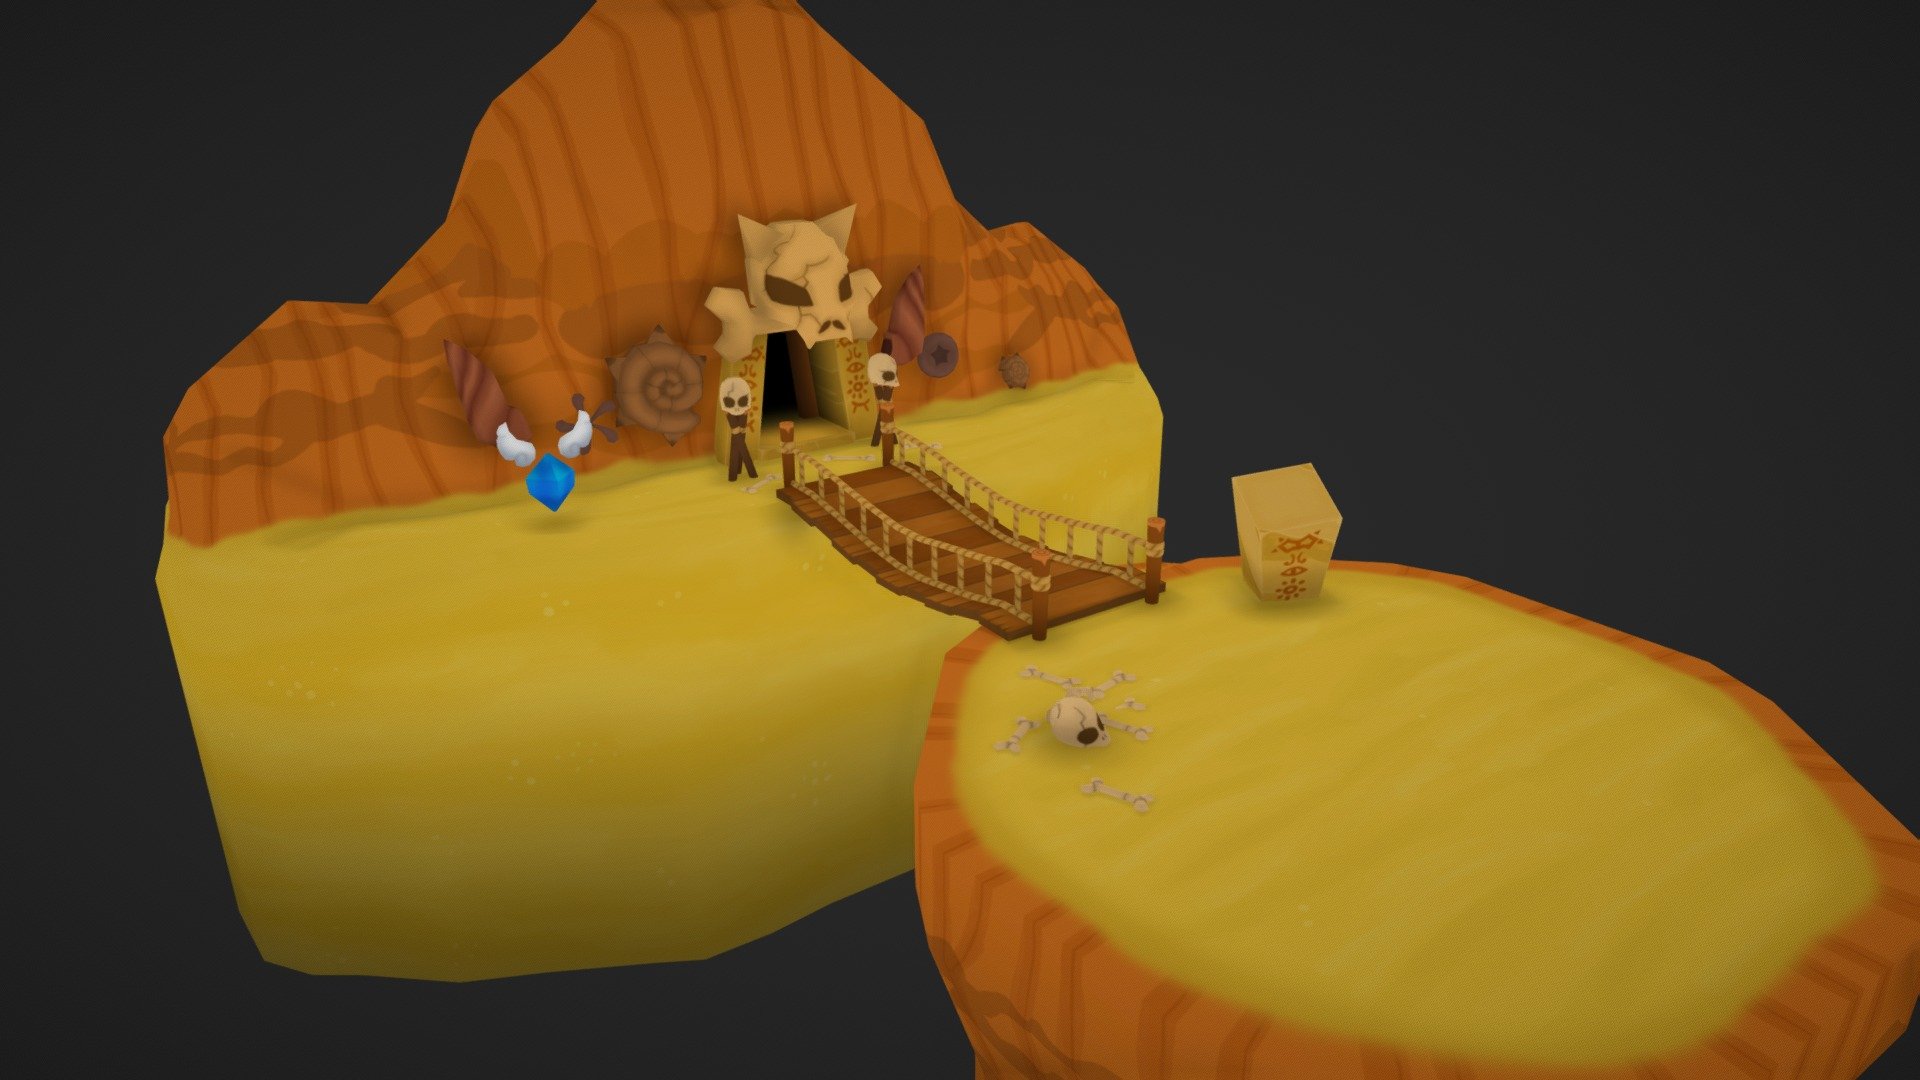 Fanart of the Fossils Cavern in Fantasy Life on 3DS.

I used Photoshop and Maya 3d model